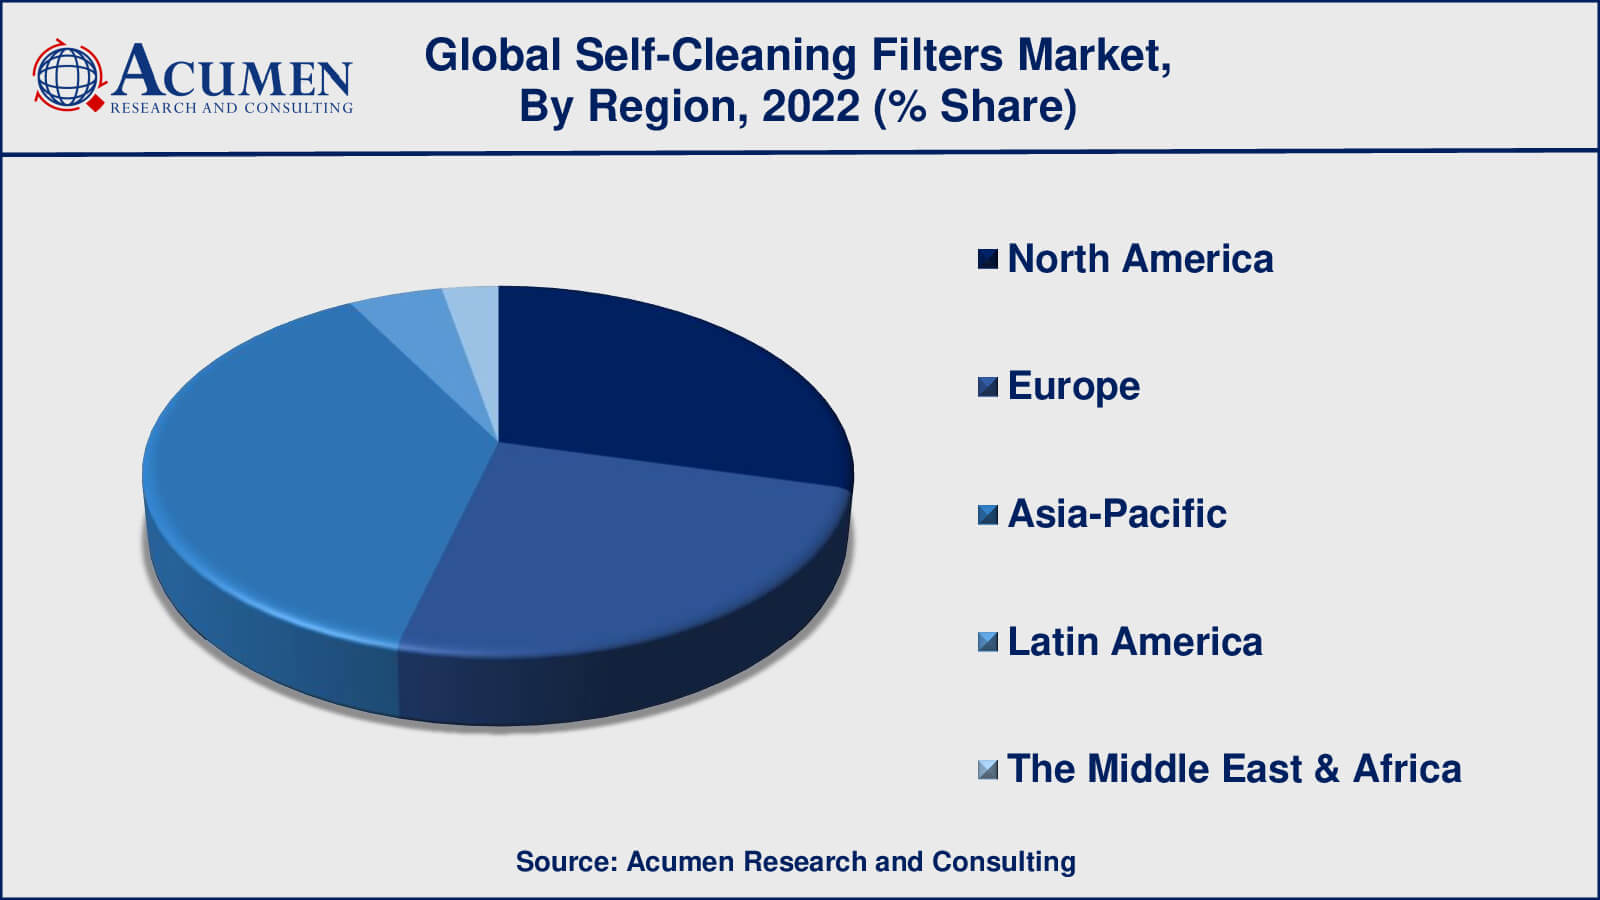 Self-Cleaning Filters Market Drivers